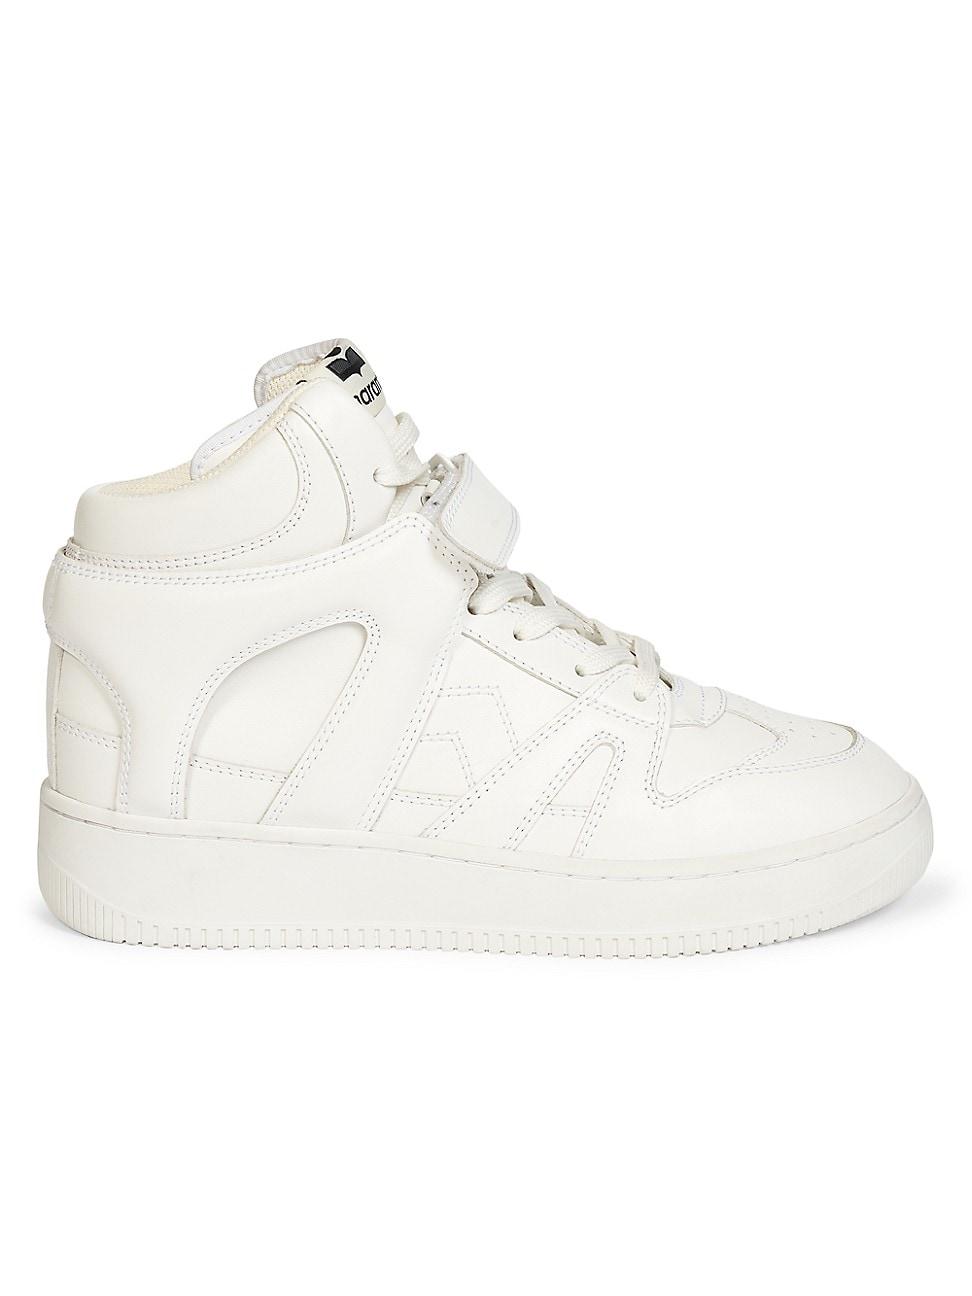 Isabel Marant Ellyn Leather High-top Sneakers in Natural | Lyst